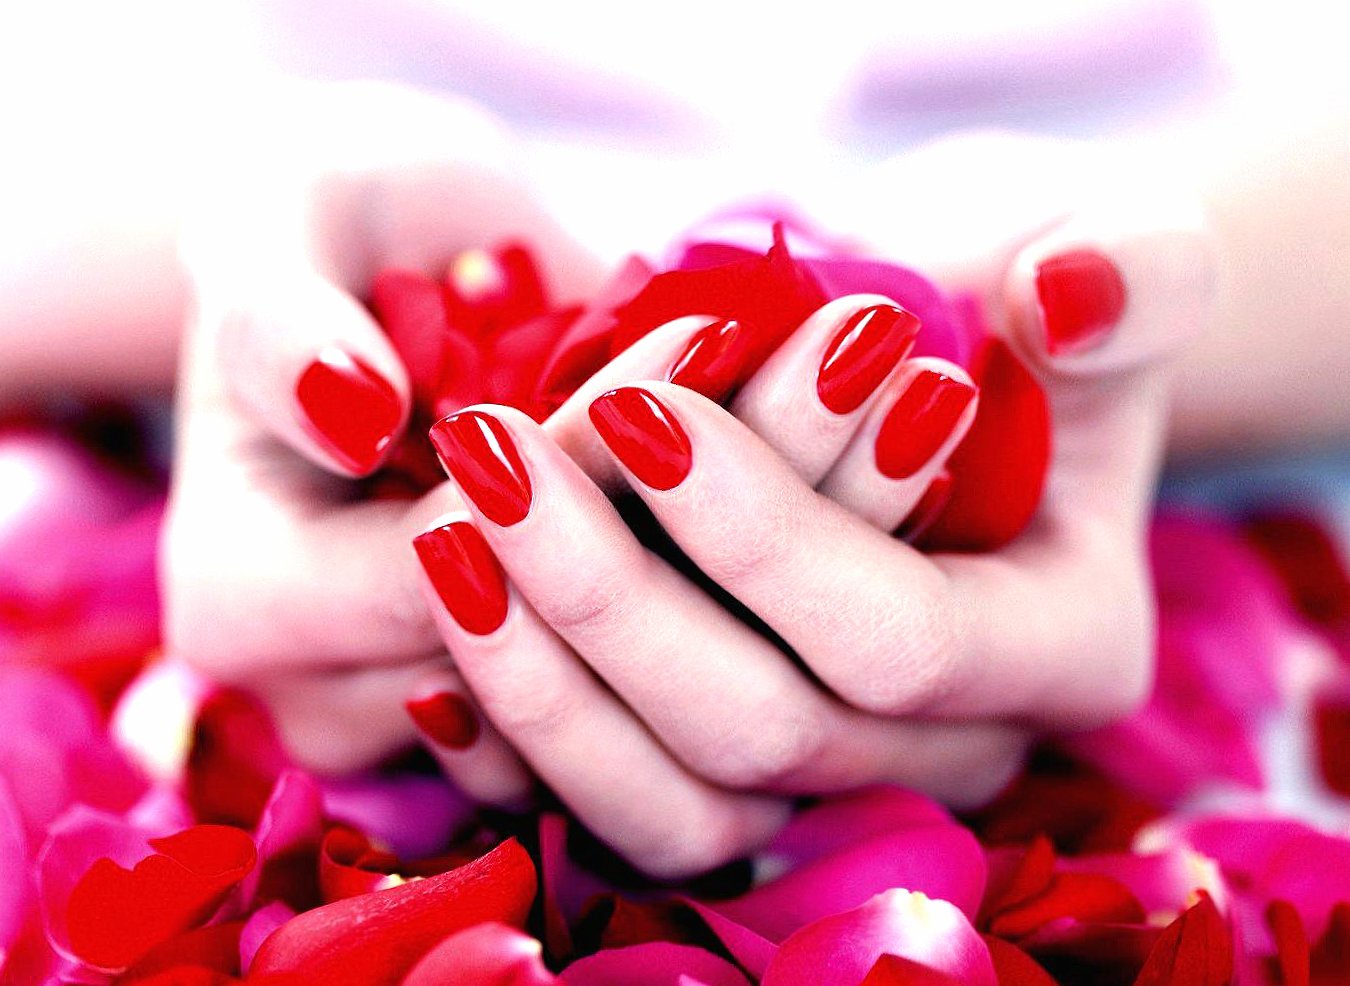 hands and rose petals wallpapers HD quality